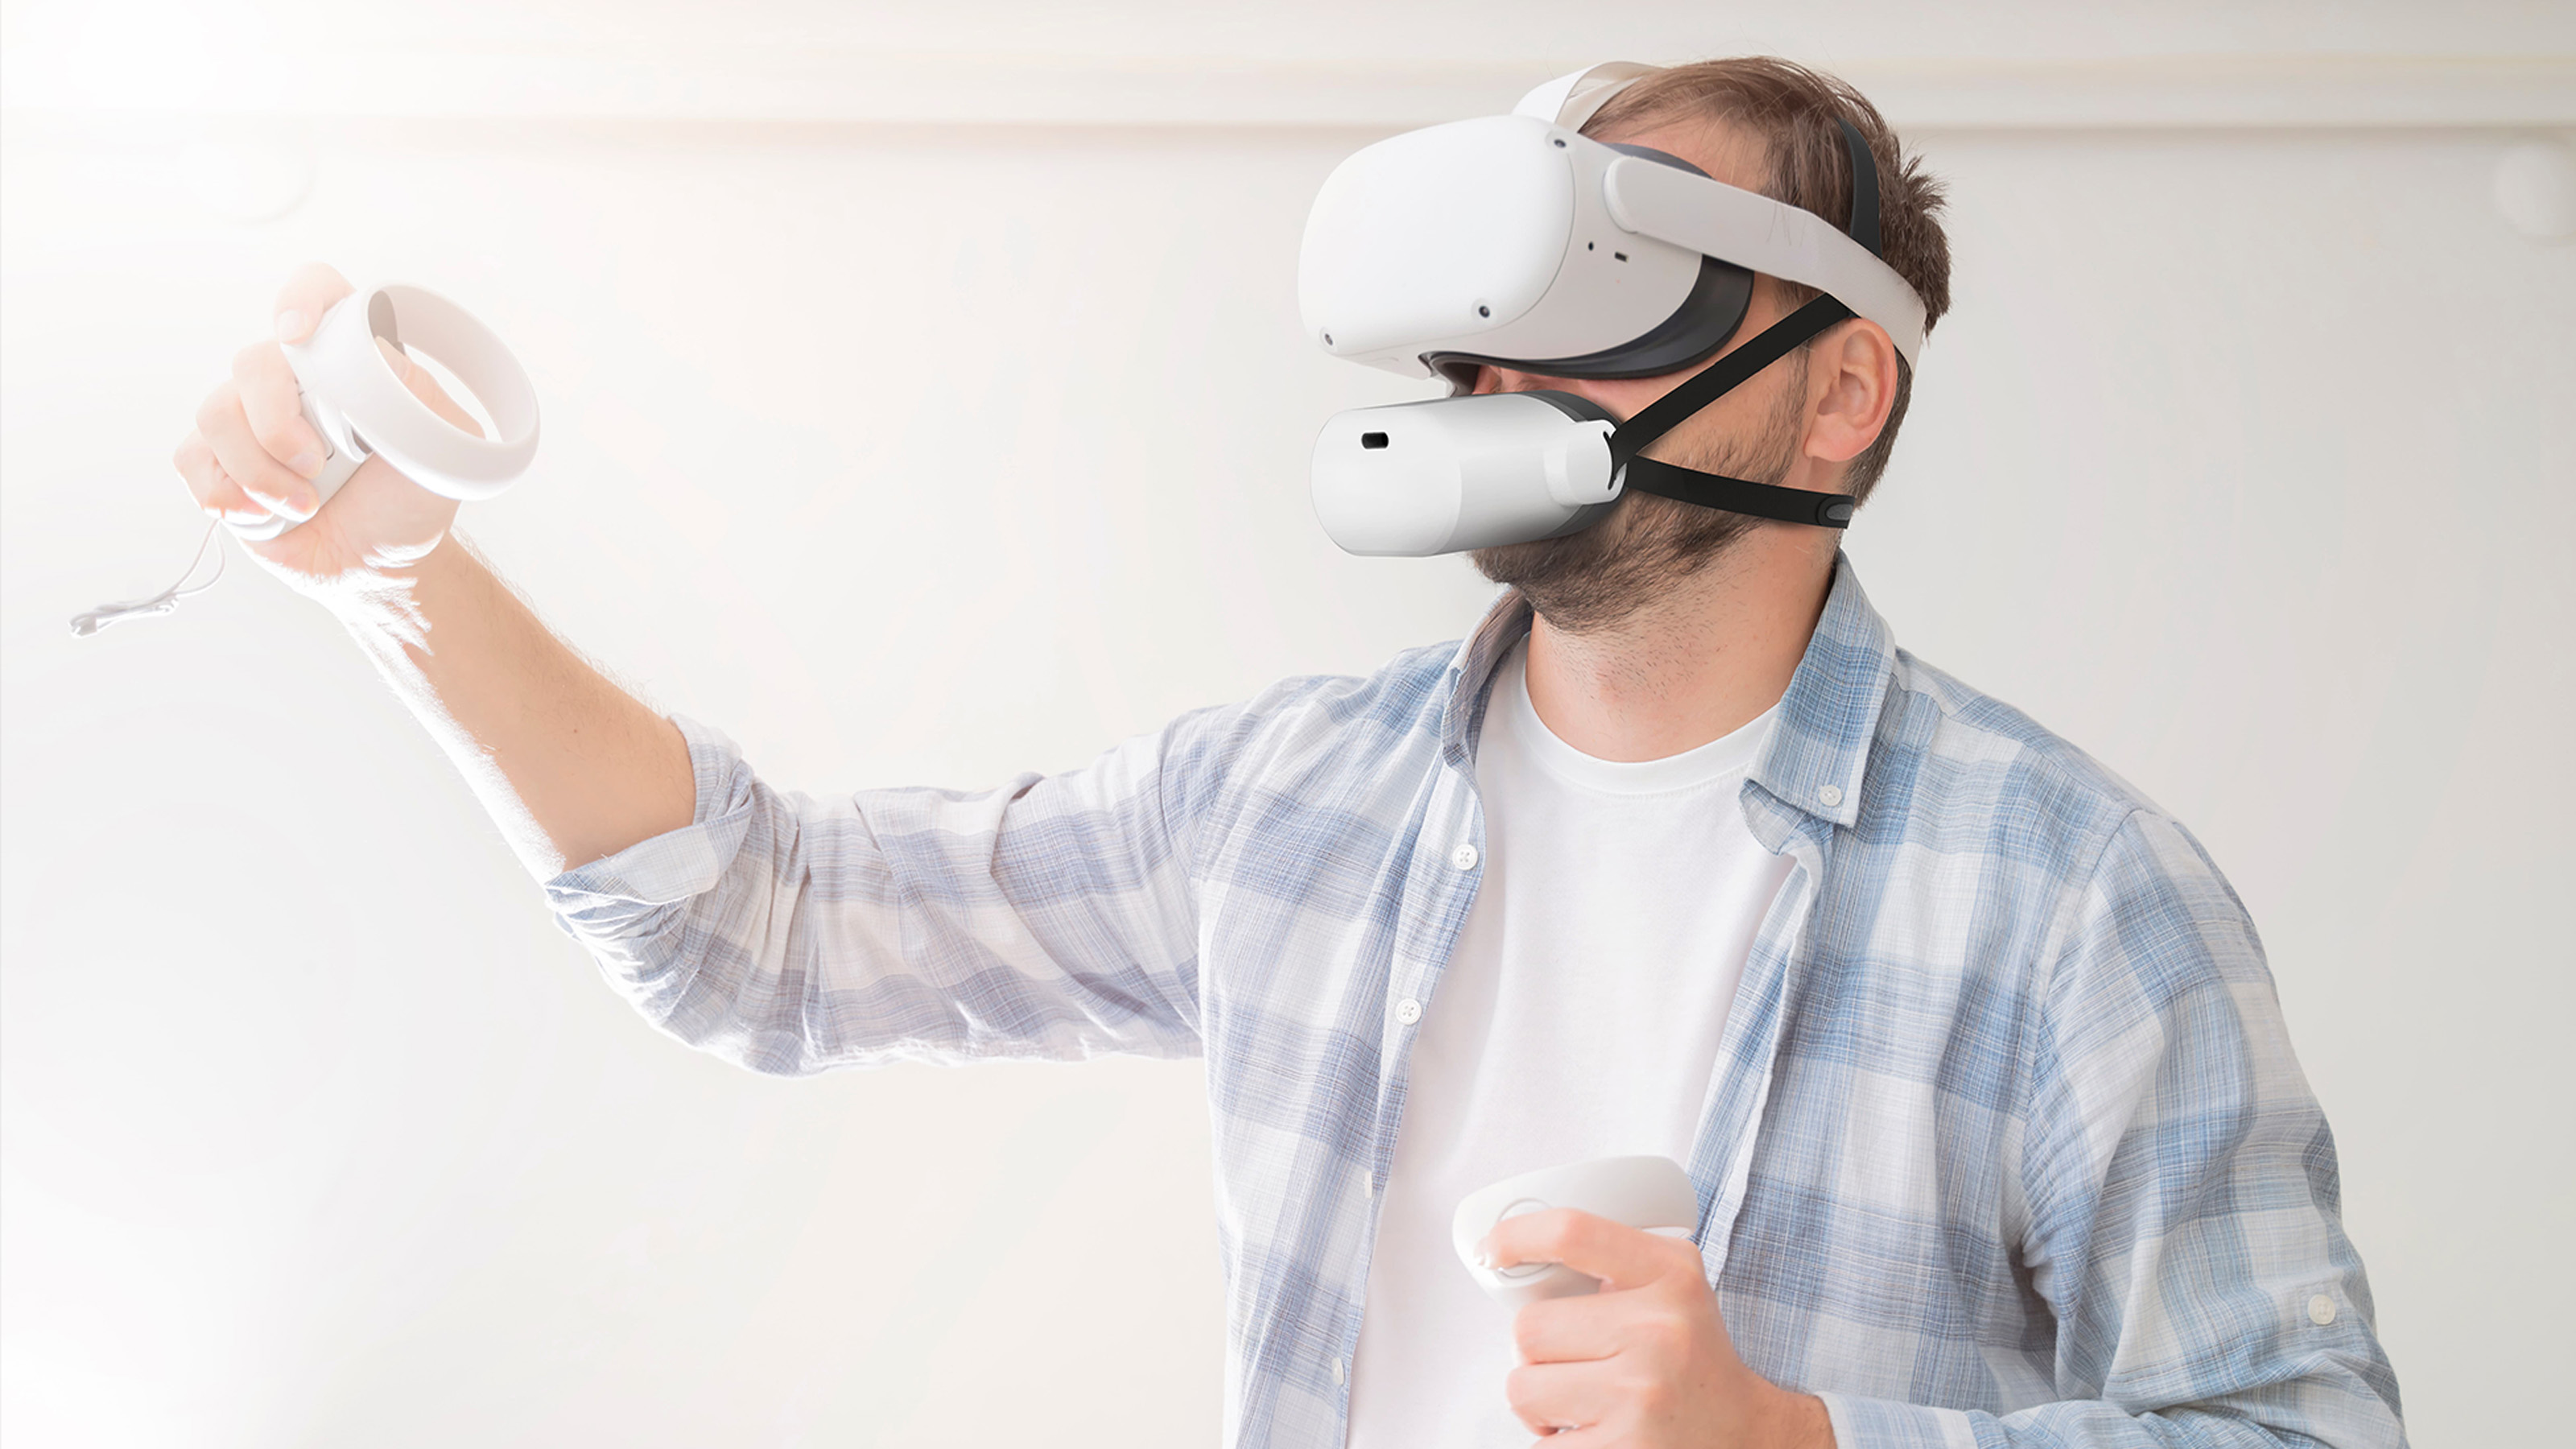 An image of a man wearing the Mutalk microphone and a VR headset on a white background